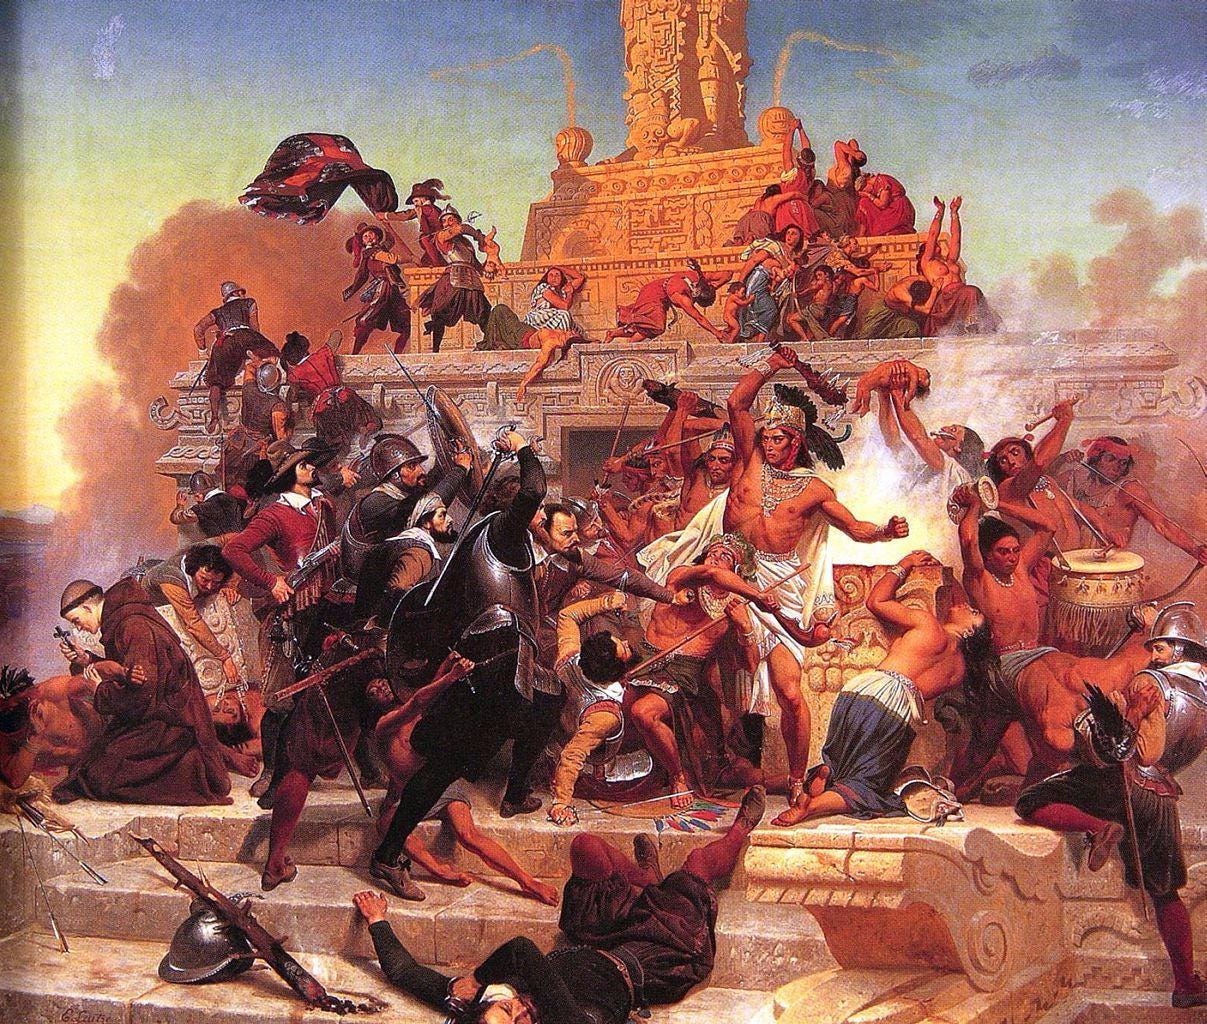 Storming of the Teocalli by Cortez and His Troops. By Emanuel Leutze in 1848 (California State University, Bakersfield, USA)